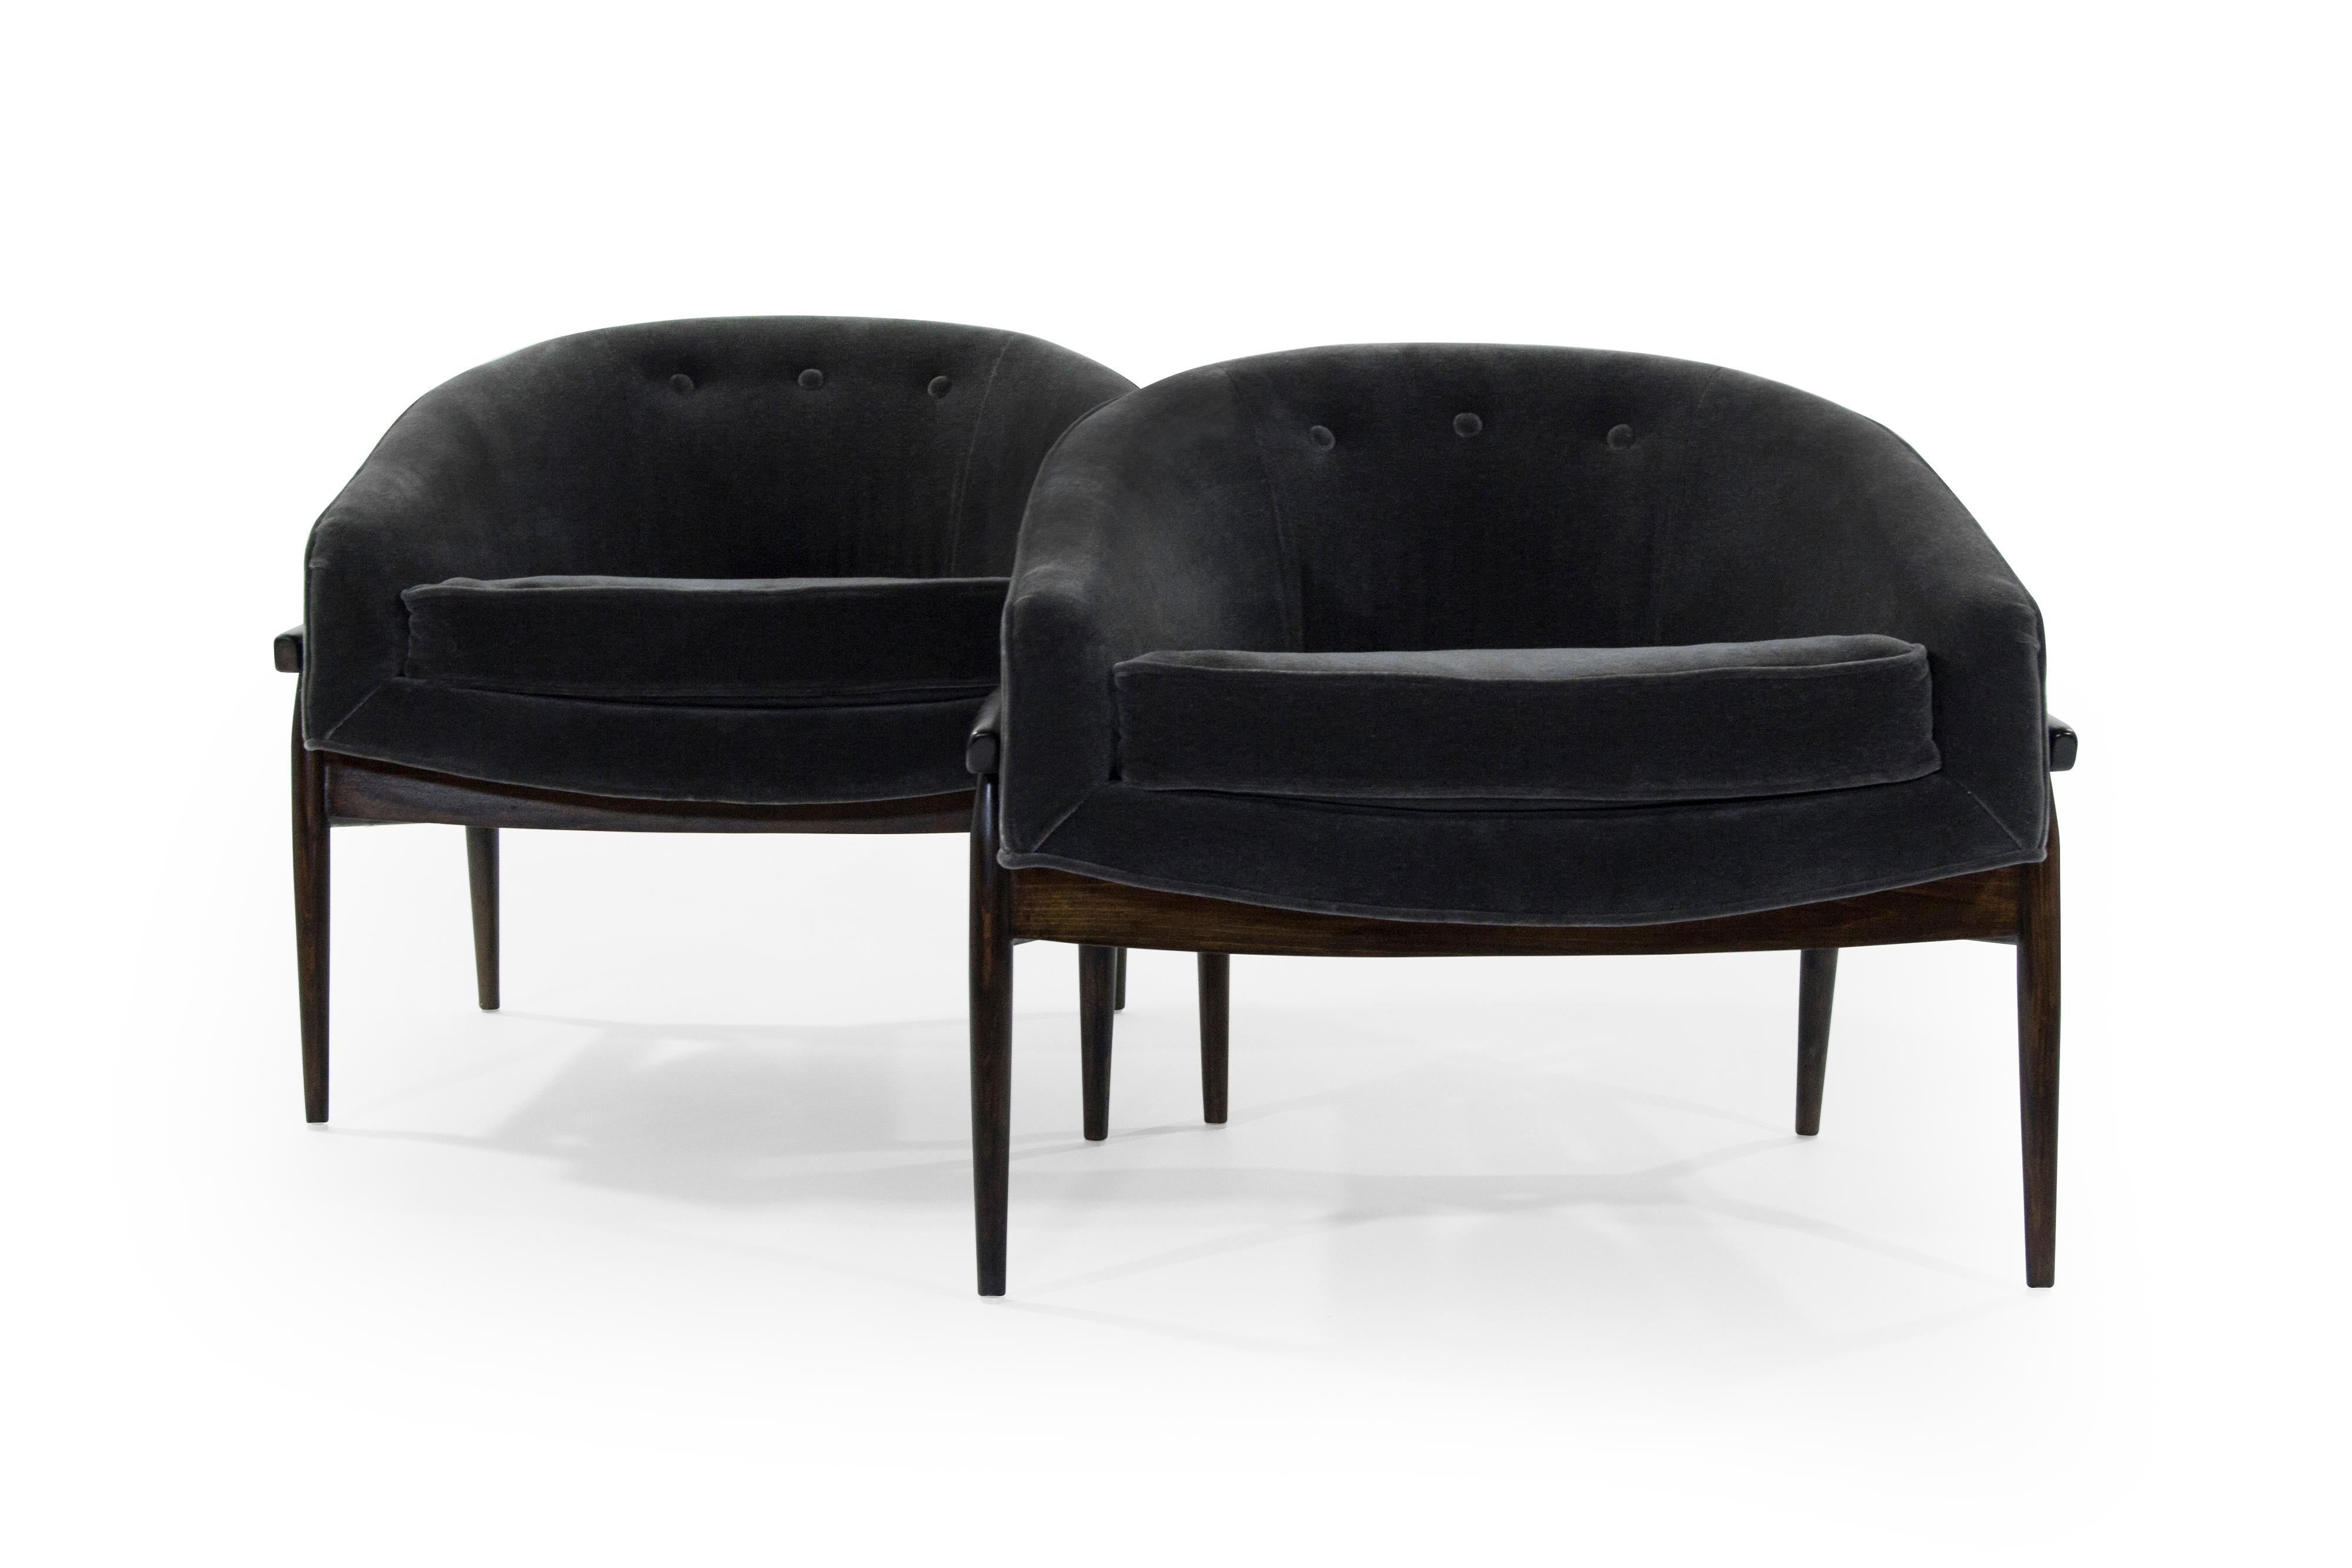 20th Century Sculptural Barrel Lounge Chairs by Milo Baughman, 1950s